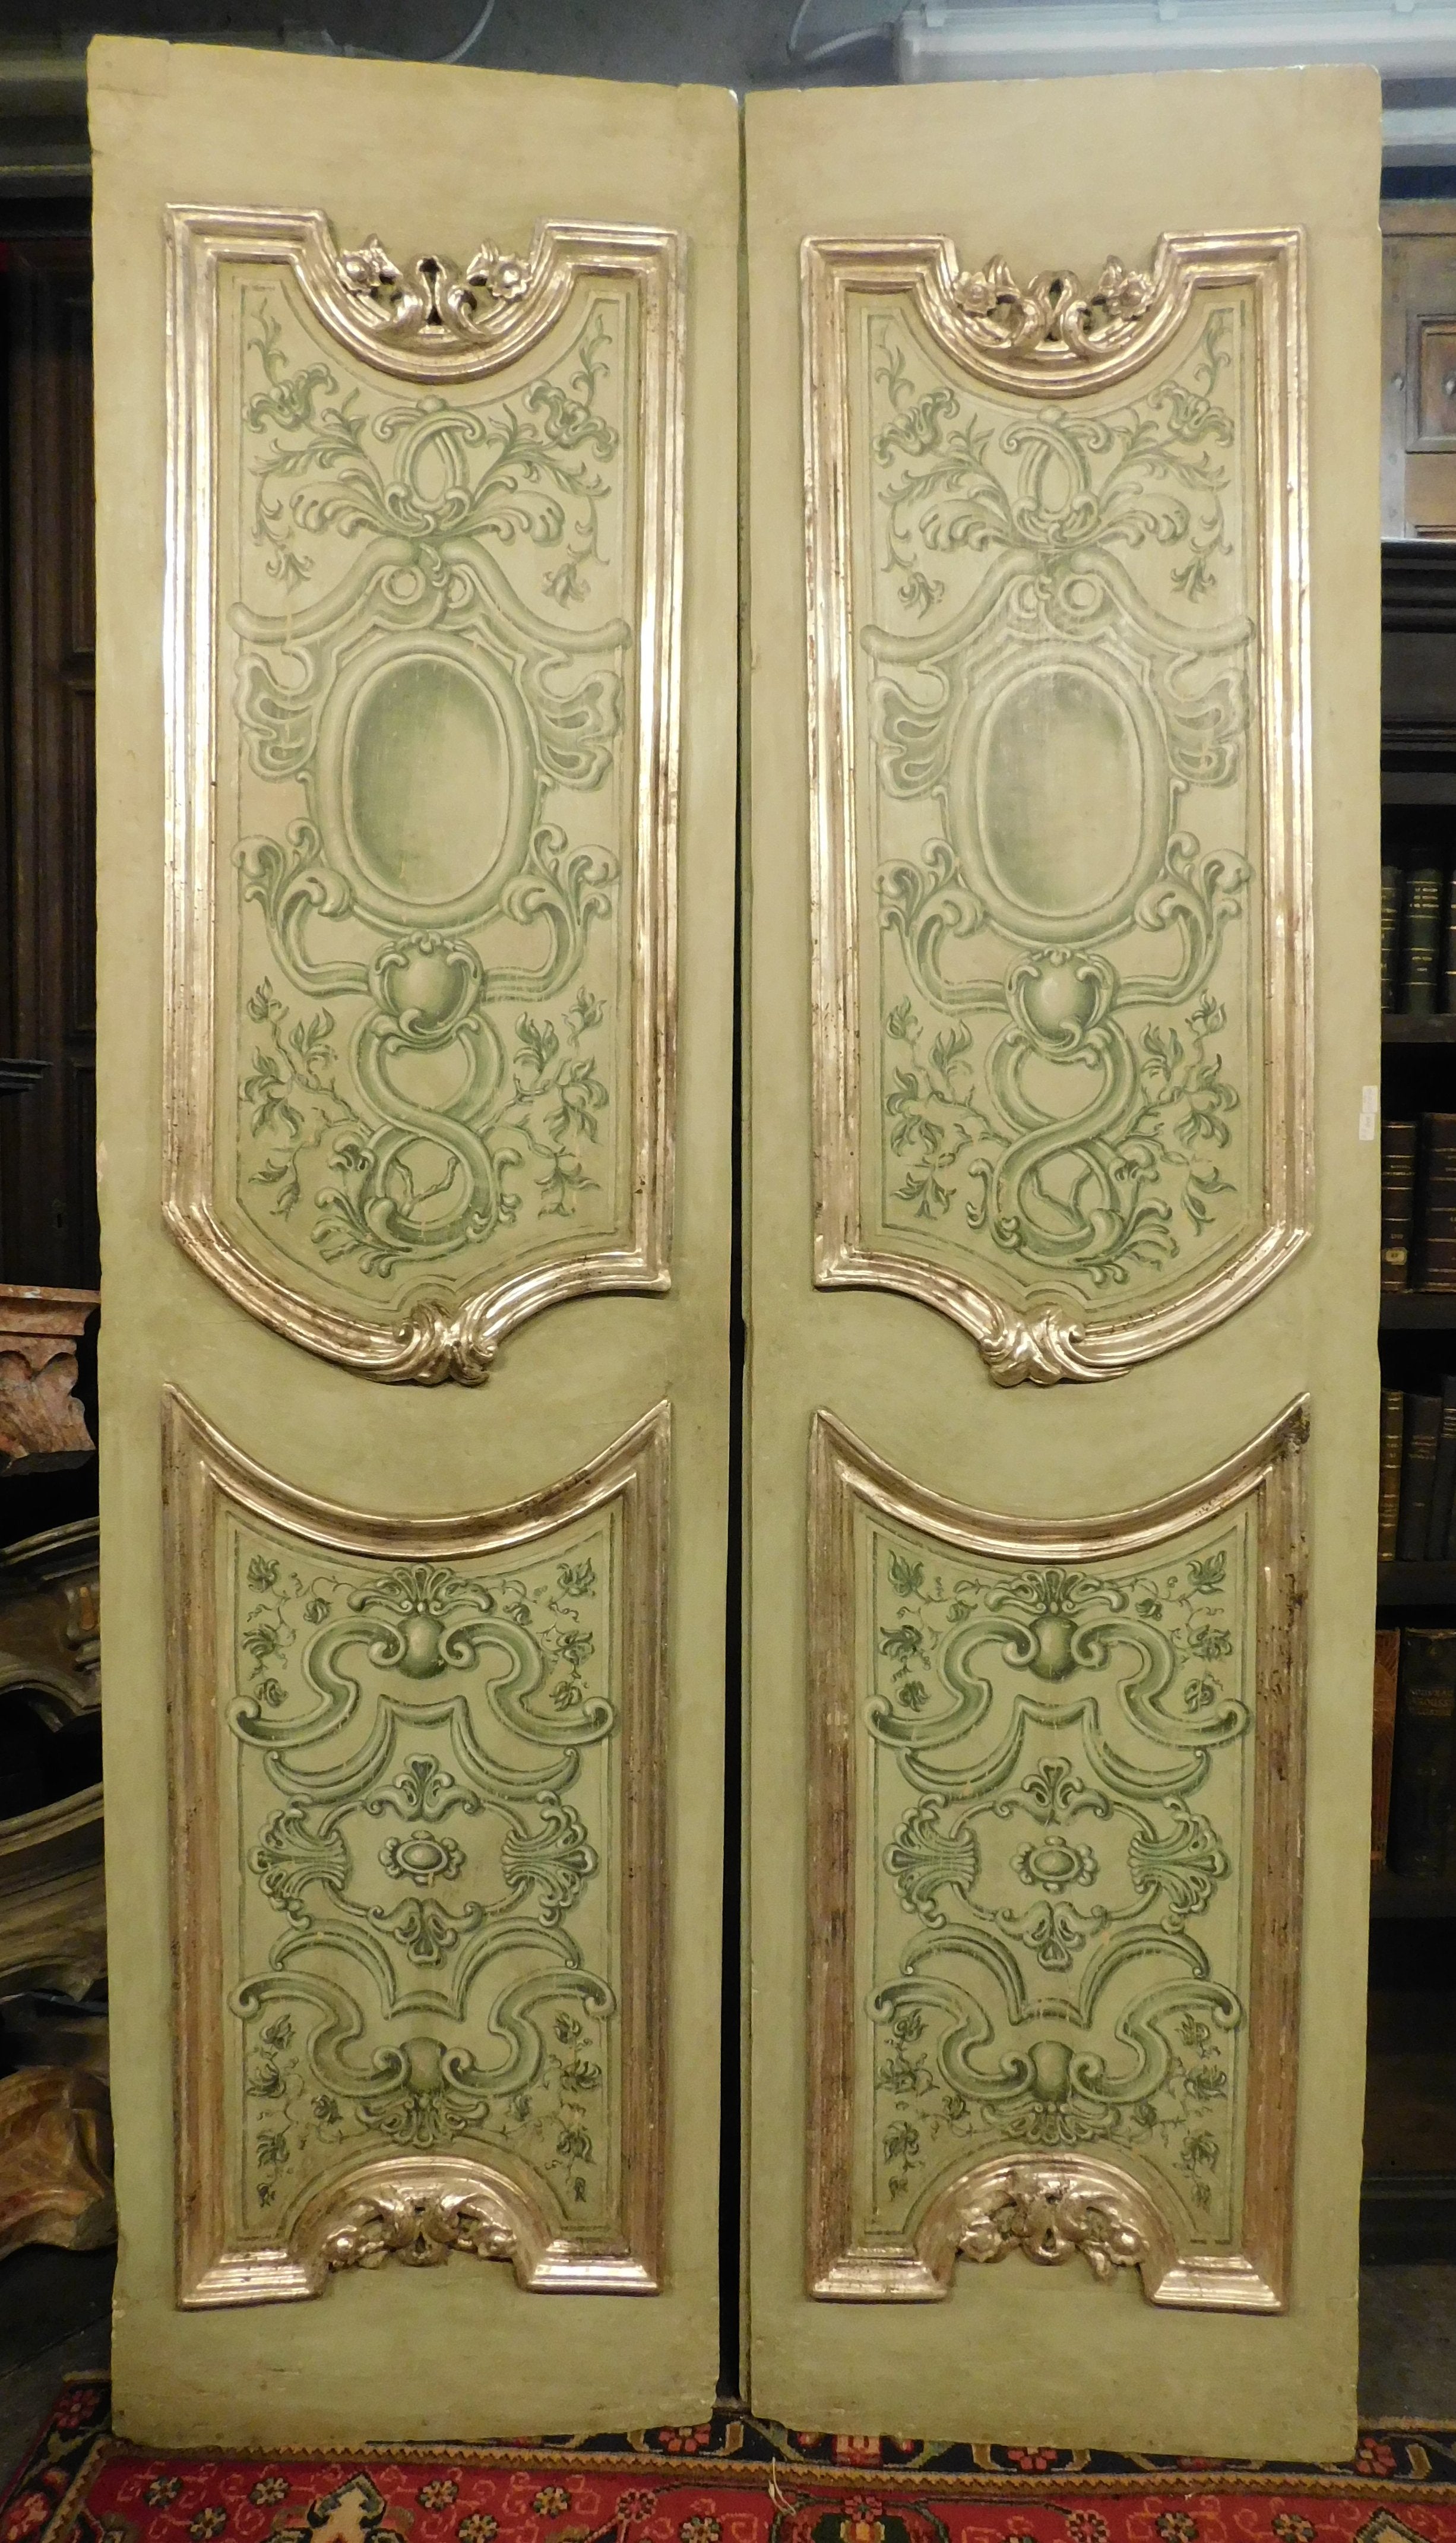 Set of 4 Ancient two-winged doors, richly hand painted, carved in molure and silver, of great value and unavailable in this quantity and quality, made by master craftsmen in Italy in the middle of the 18th century.
Of great historical and cultural